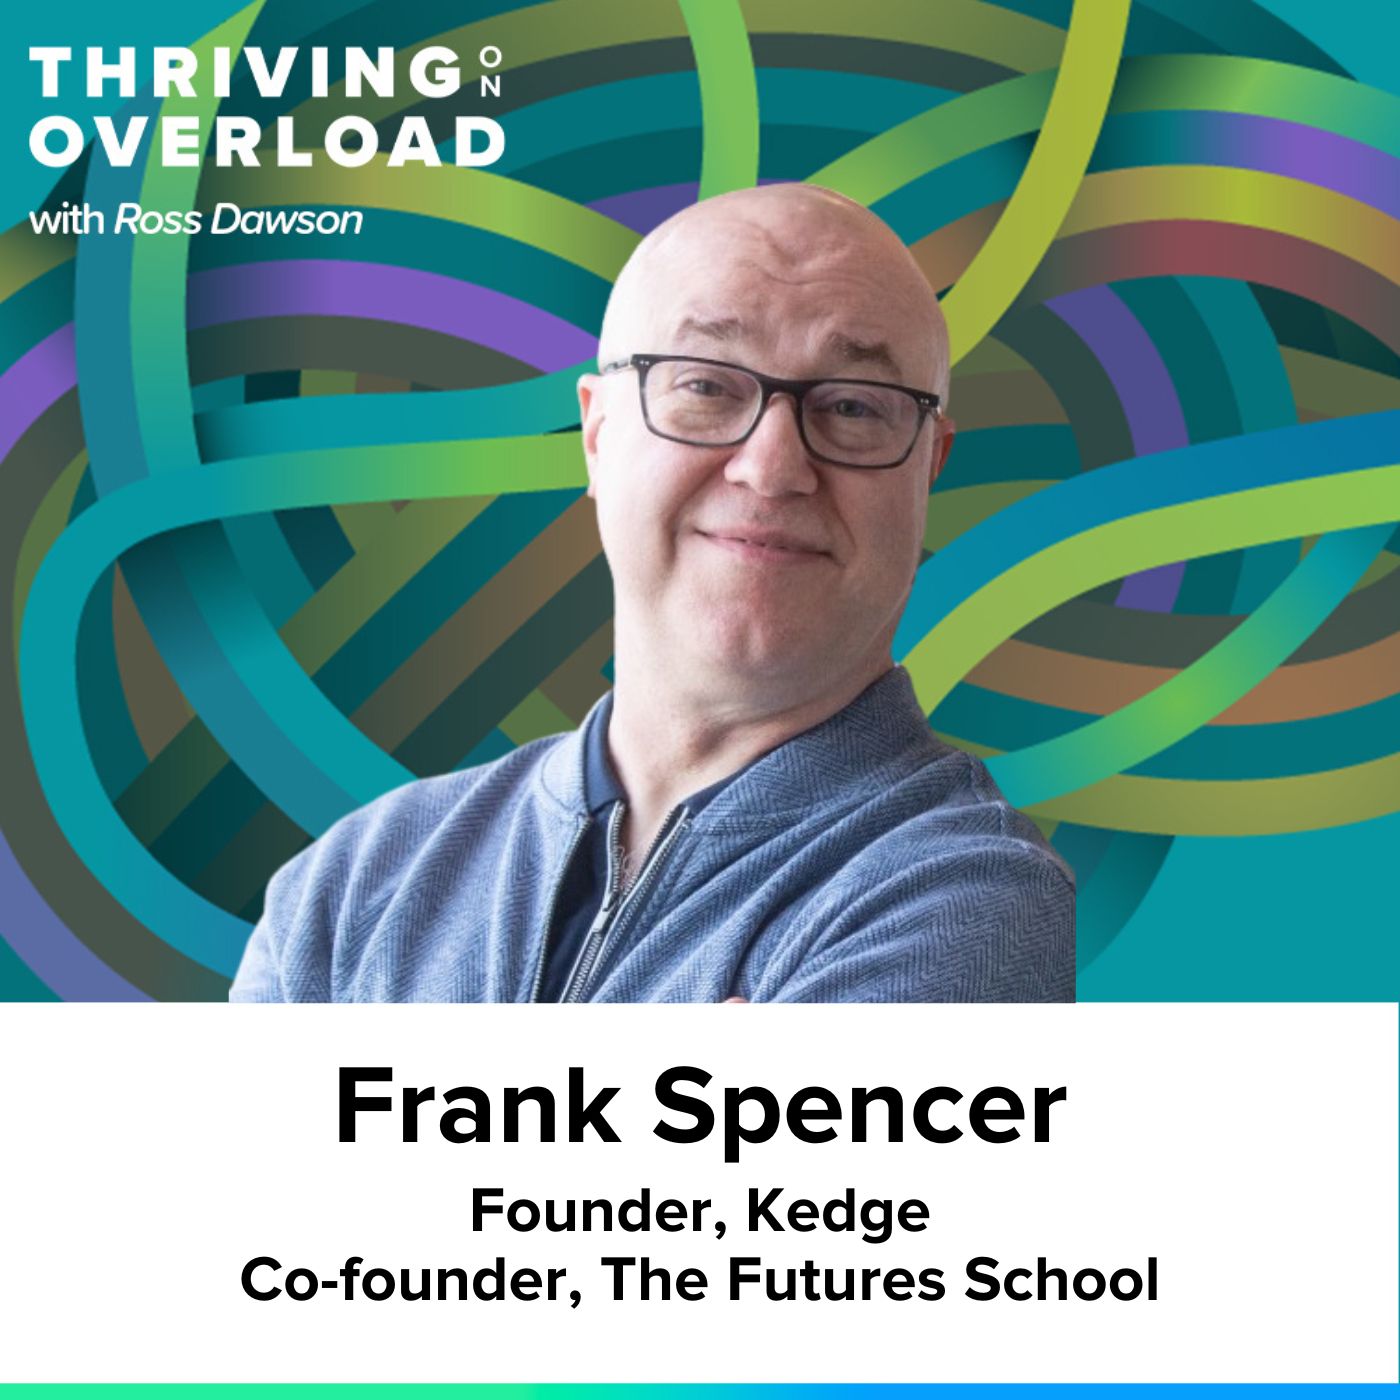 Frank Spencer IV on sense-making for complexity, holoptic foresight, digital angels, and colliding trends (Ep42)